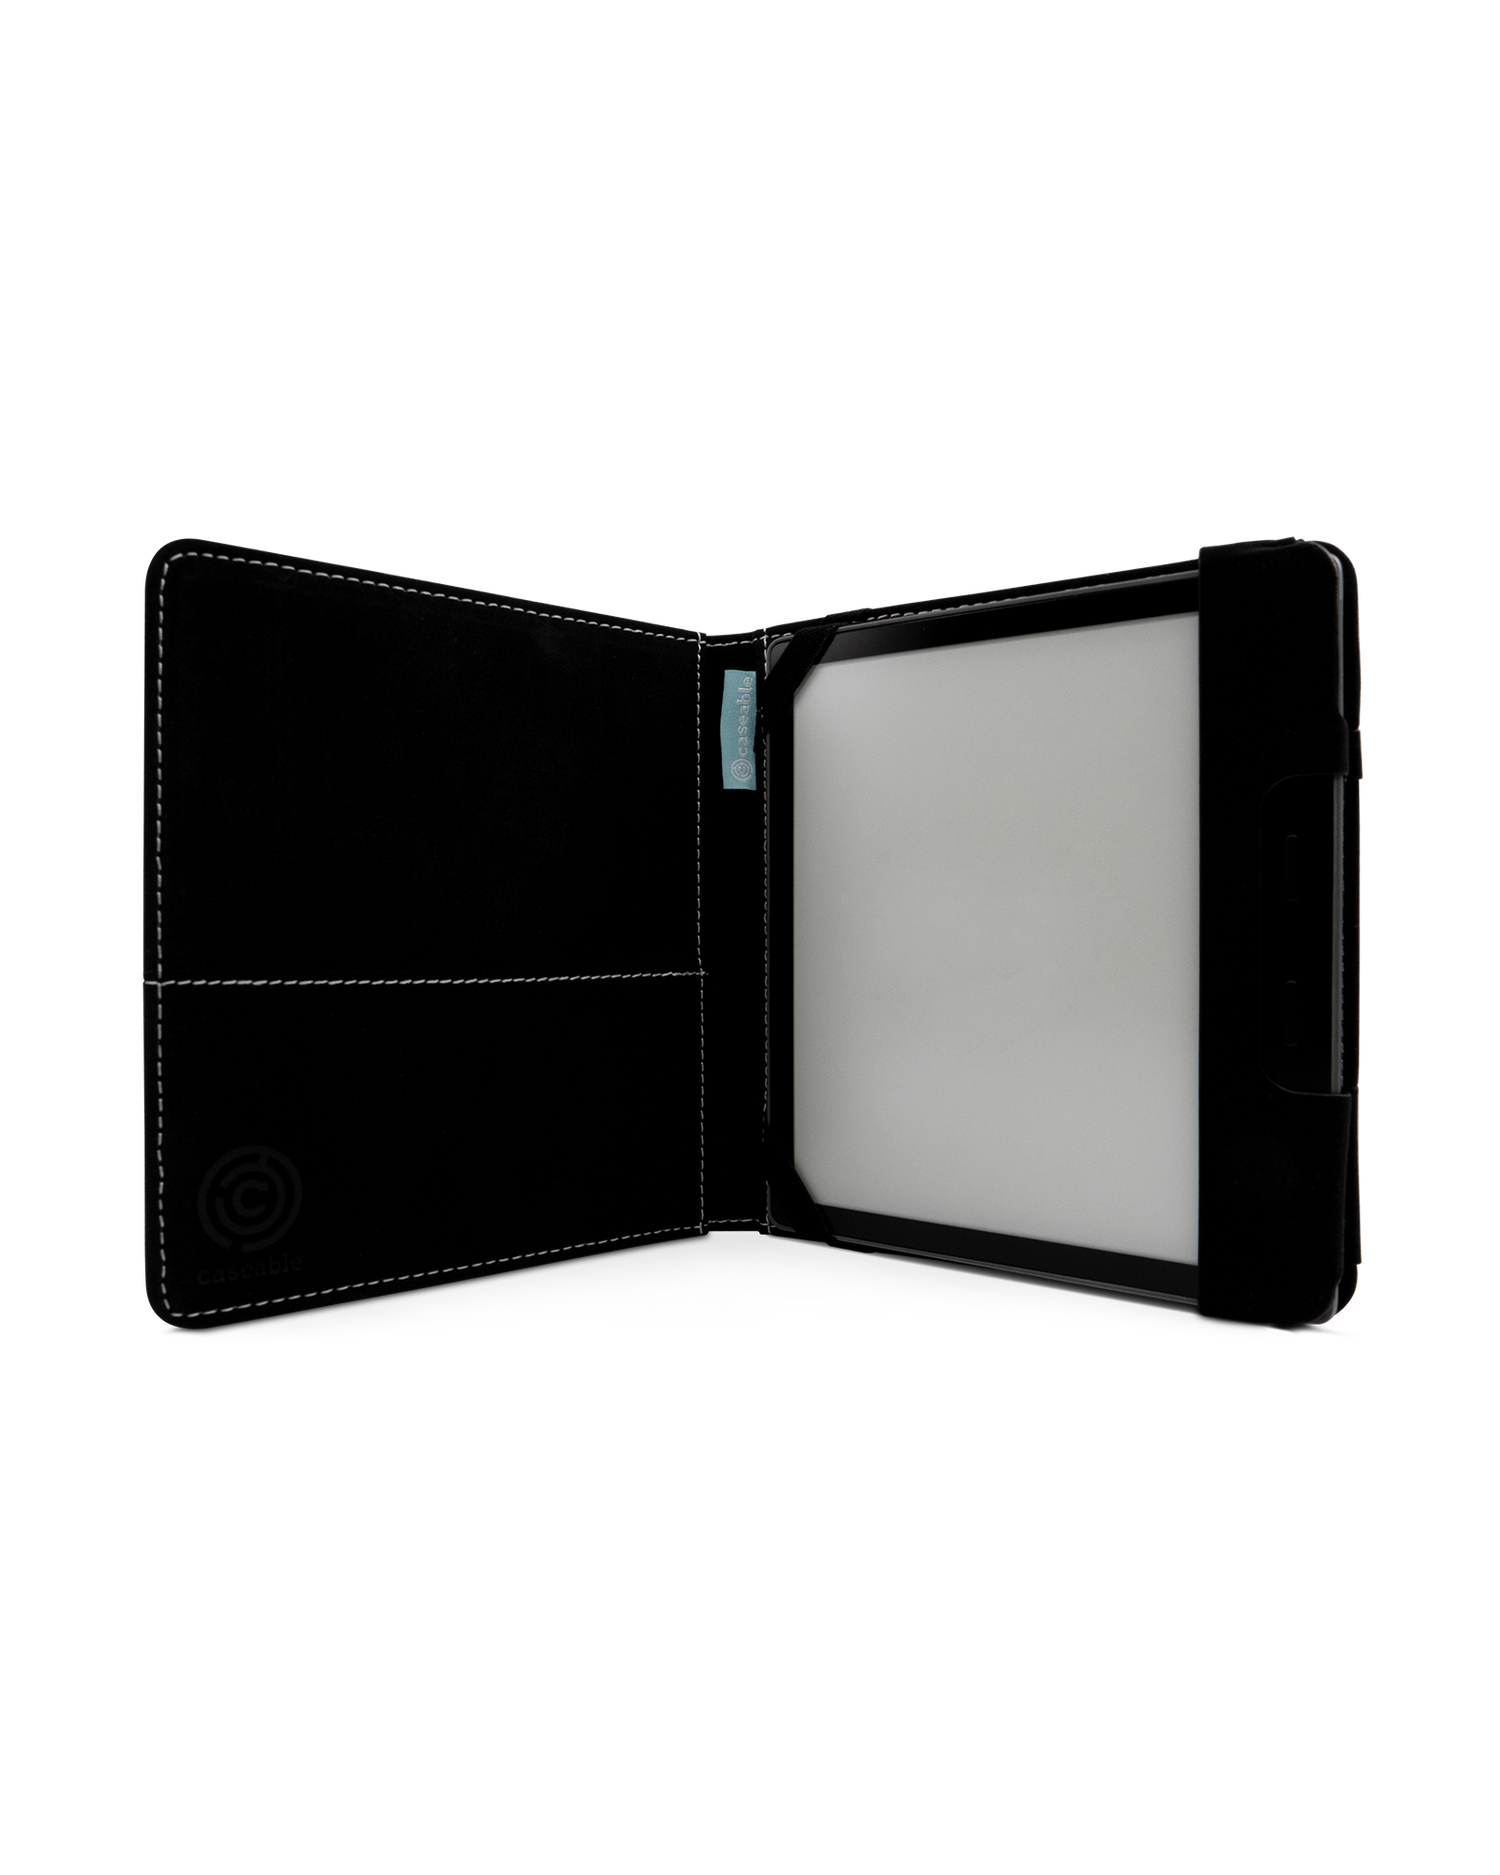 CLASSIC BLUE eReader Case for tolino vision 6: Opened interior view